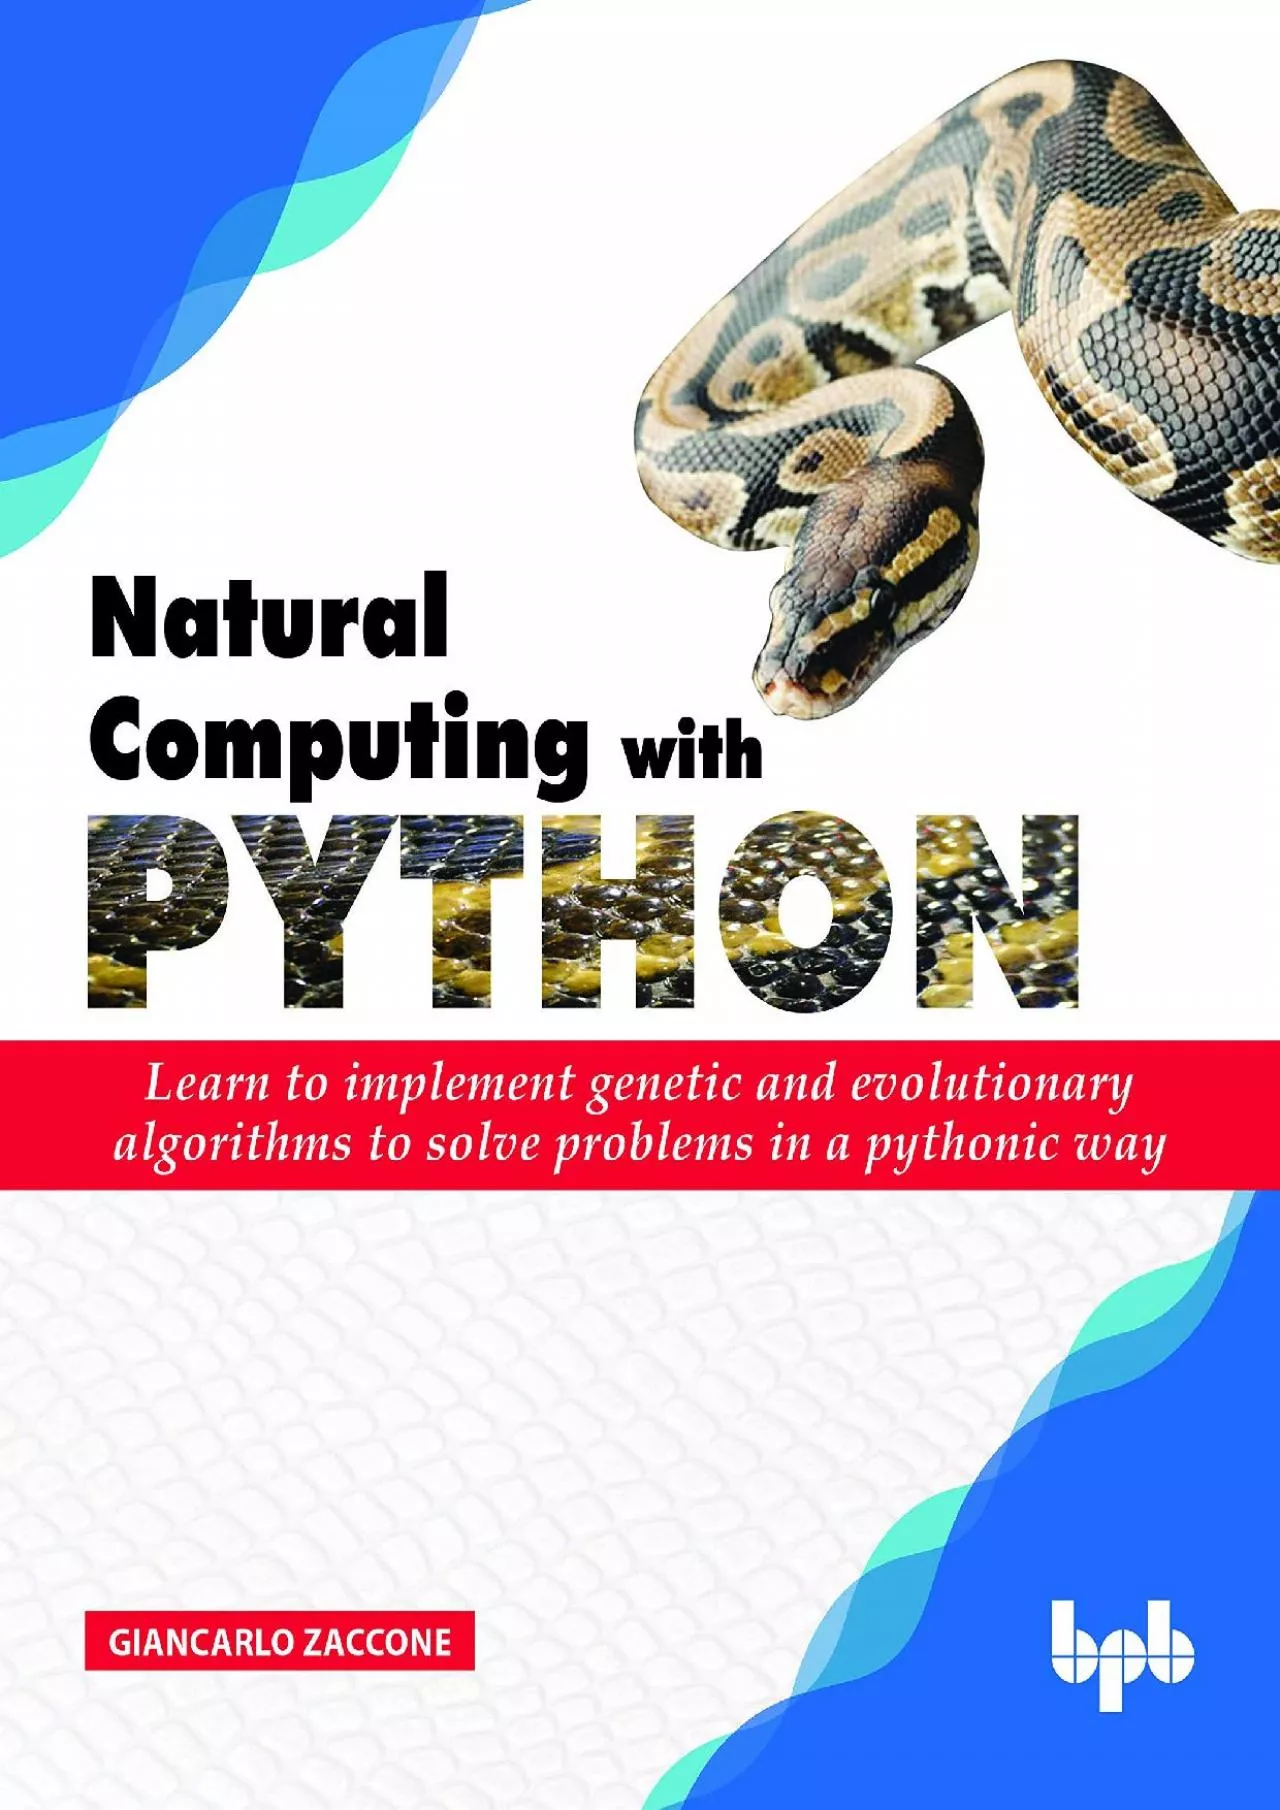 [FREE]-Natural Computing with Python: Learn to implement genetic and evolutionary algorithms